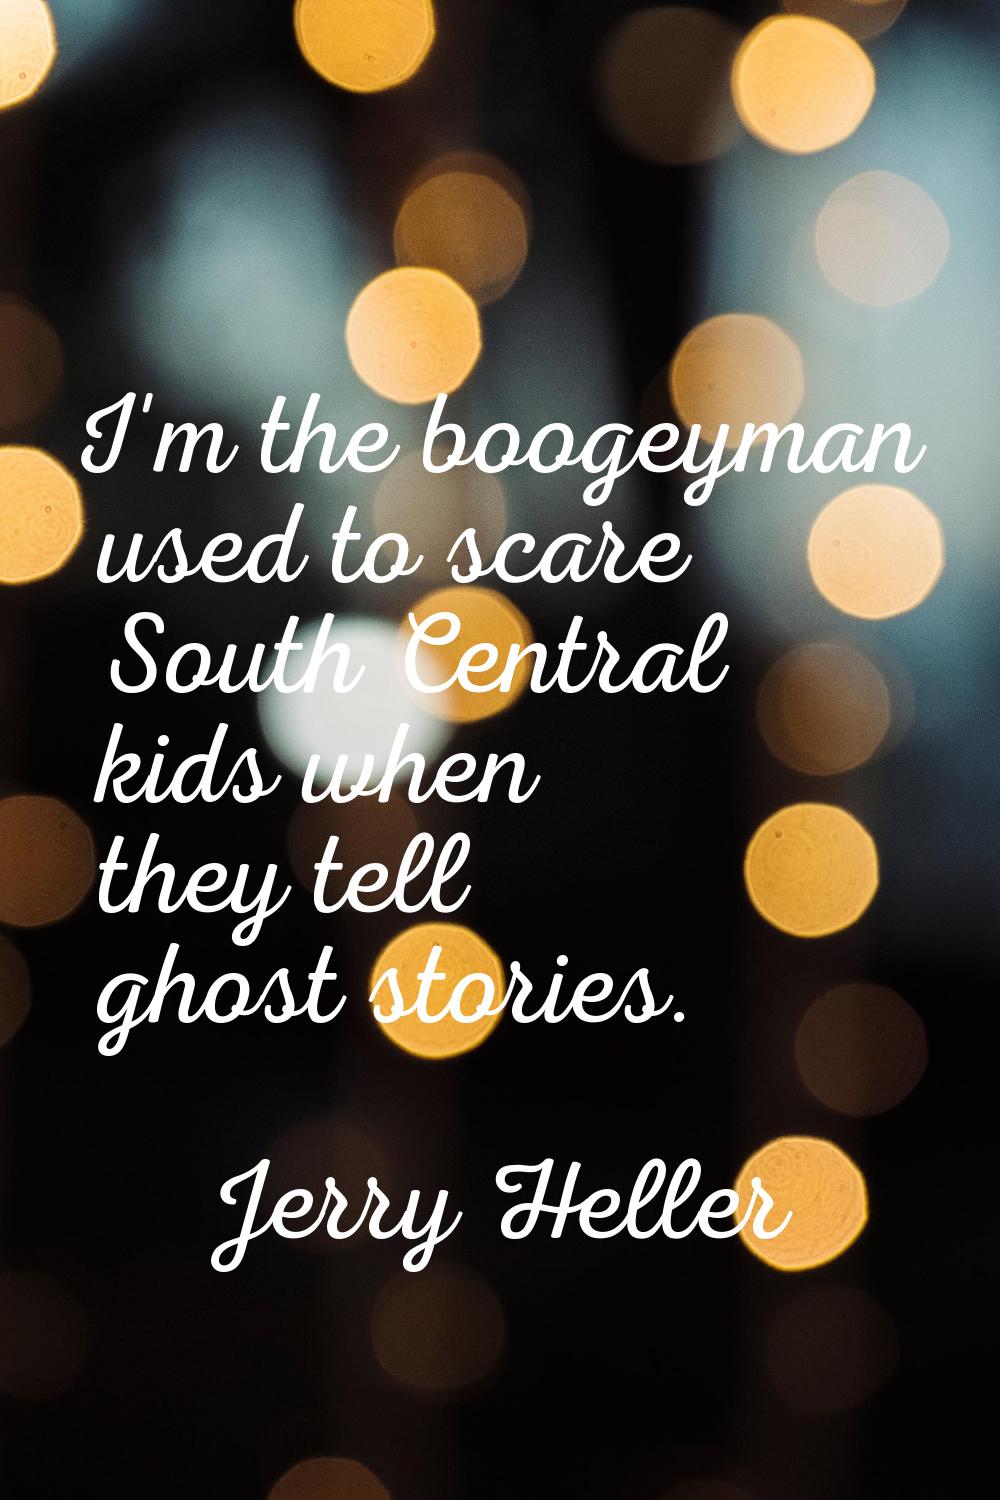 I'm the boogeyman used to scare South Central kids when they tell ghost stories.